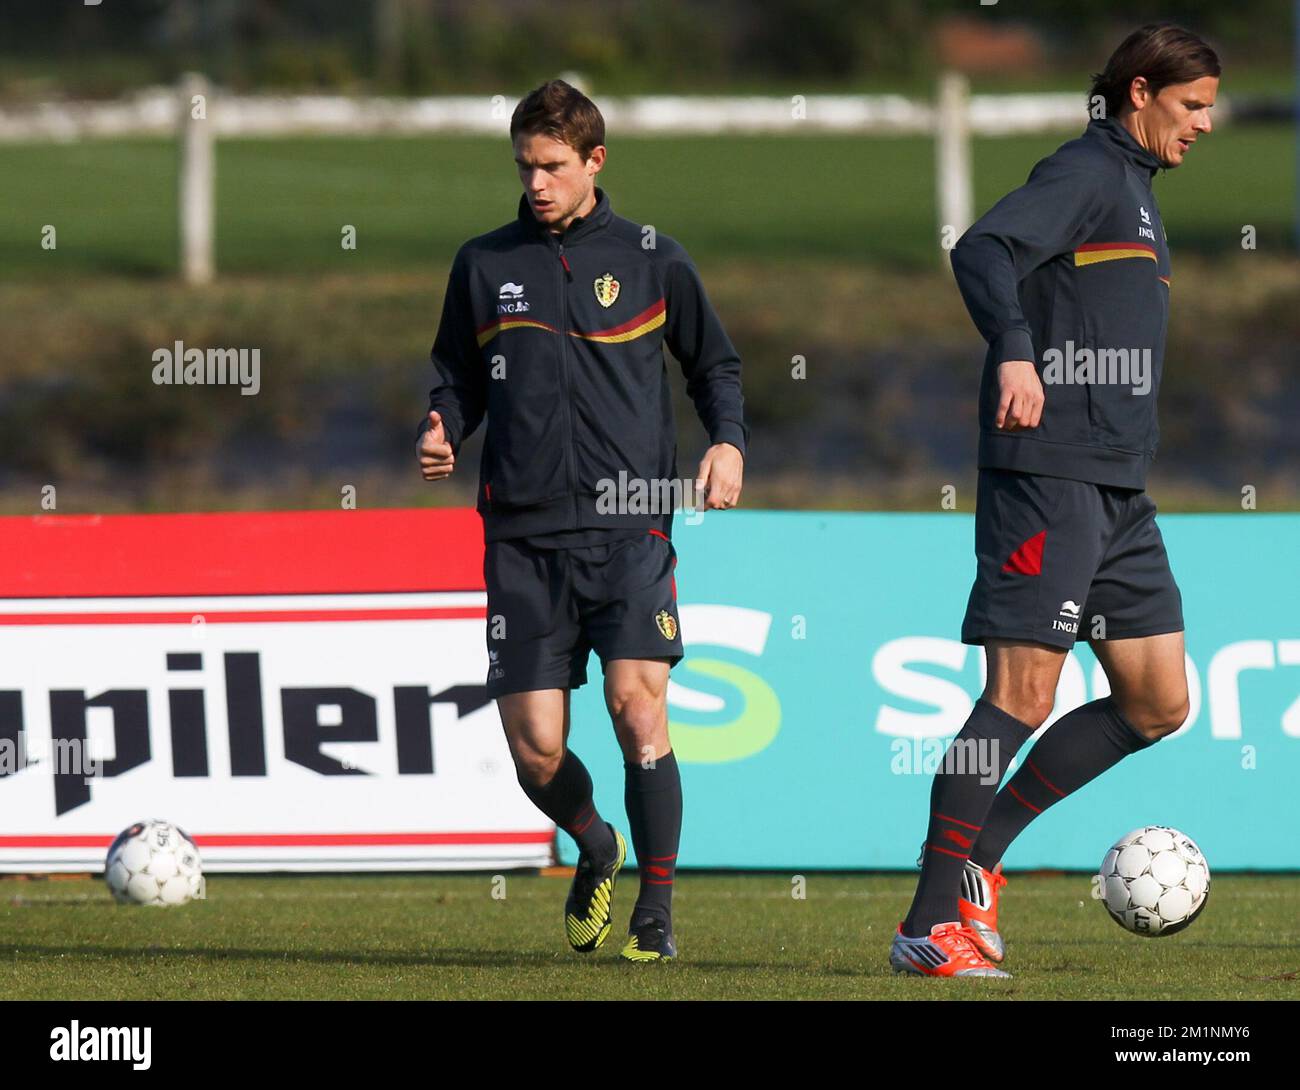 20121014 - BRUSSELS, BELGIUM: Belgium's Guillaume Gillet and Belgium's Daniel Van Buyten pictured during a training session of the Red Devils, the Belgian national soccer team, Sunday 14 October 2012 in Neerpede, Brussels. The team is preparing for a qualifying match for the 2014 Soccer World Championships, against Scotland. BELGA PHOTO VIRGINIE LEFOUR Stock Photo